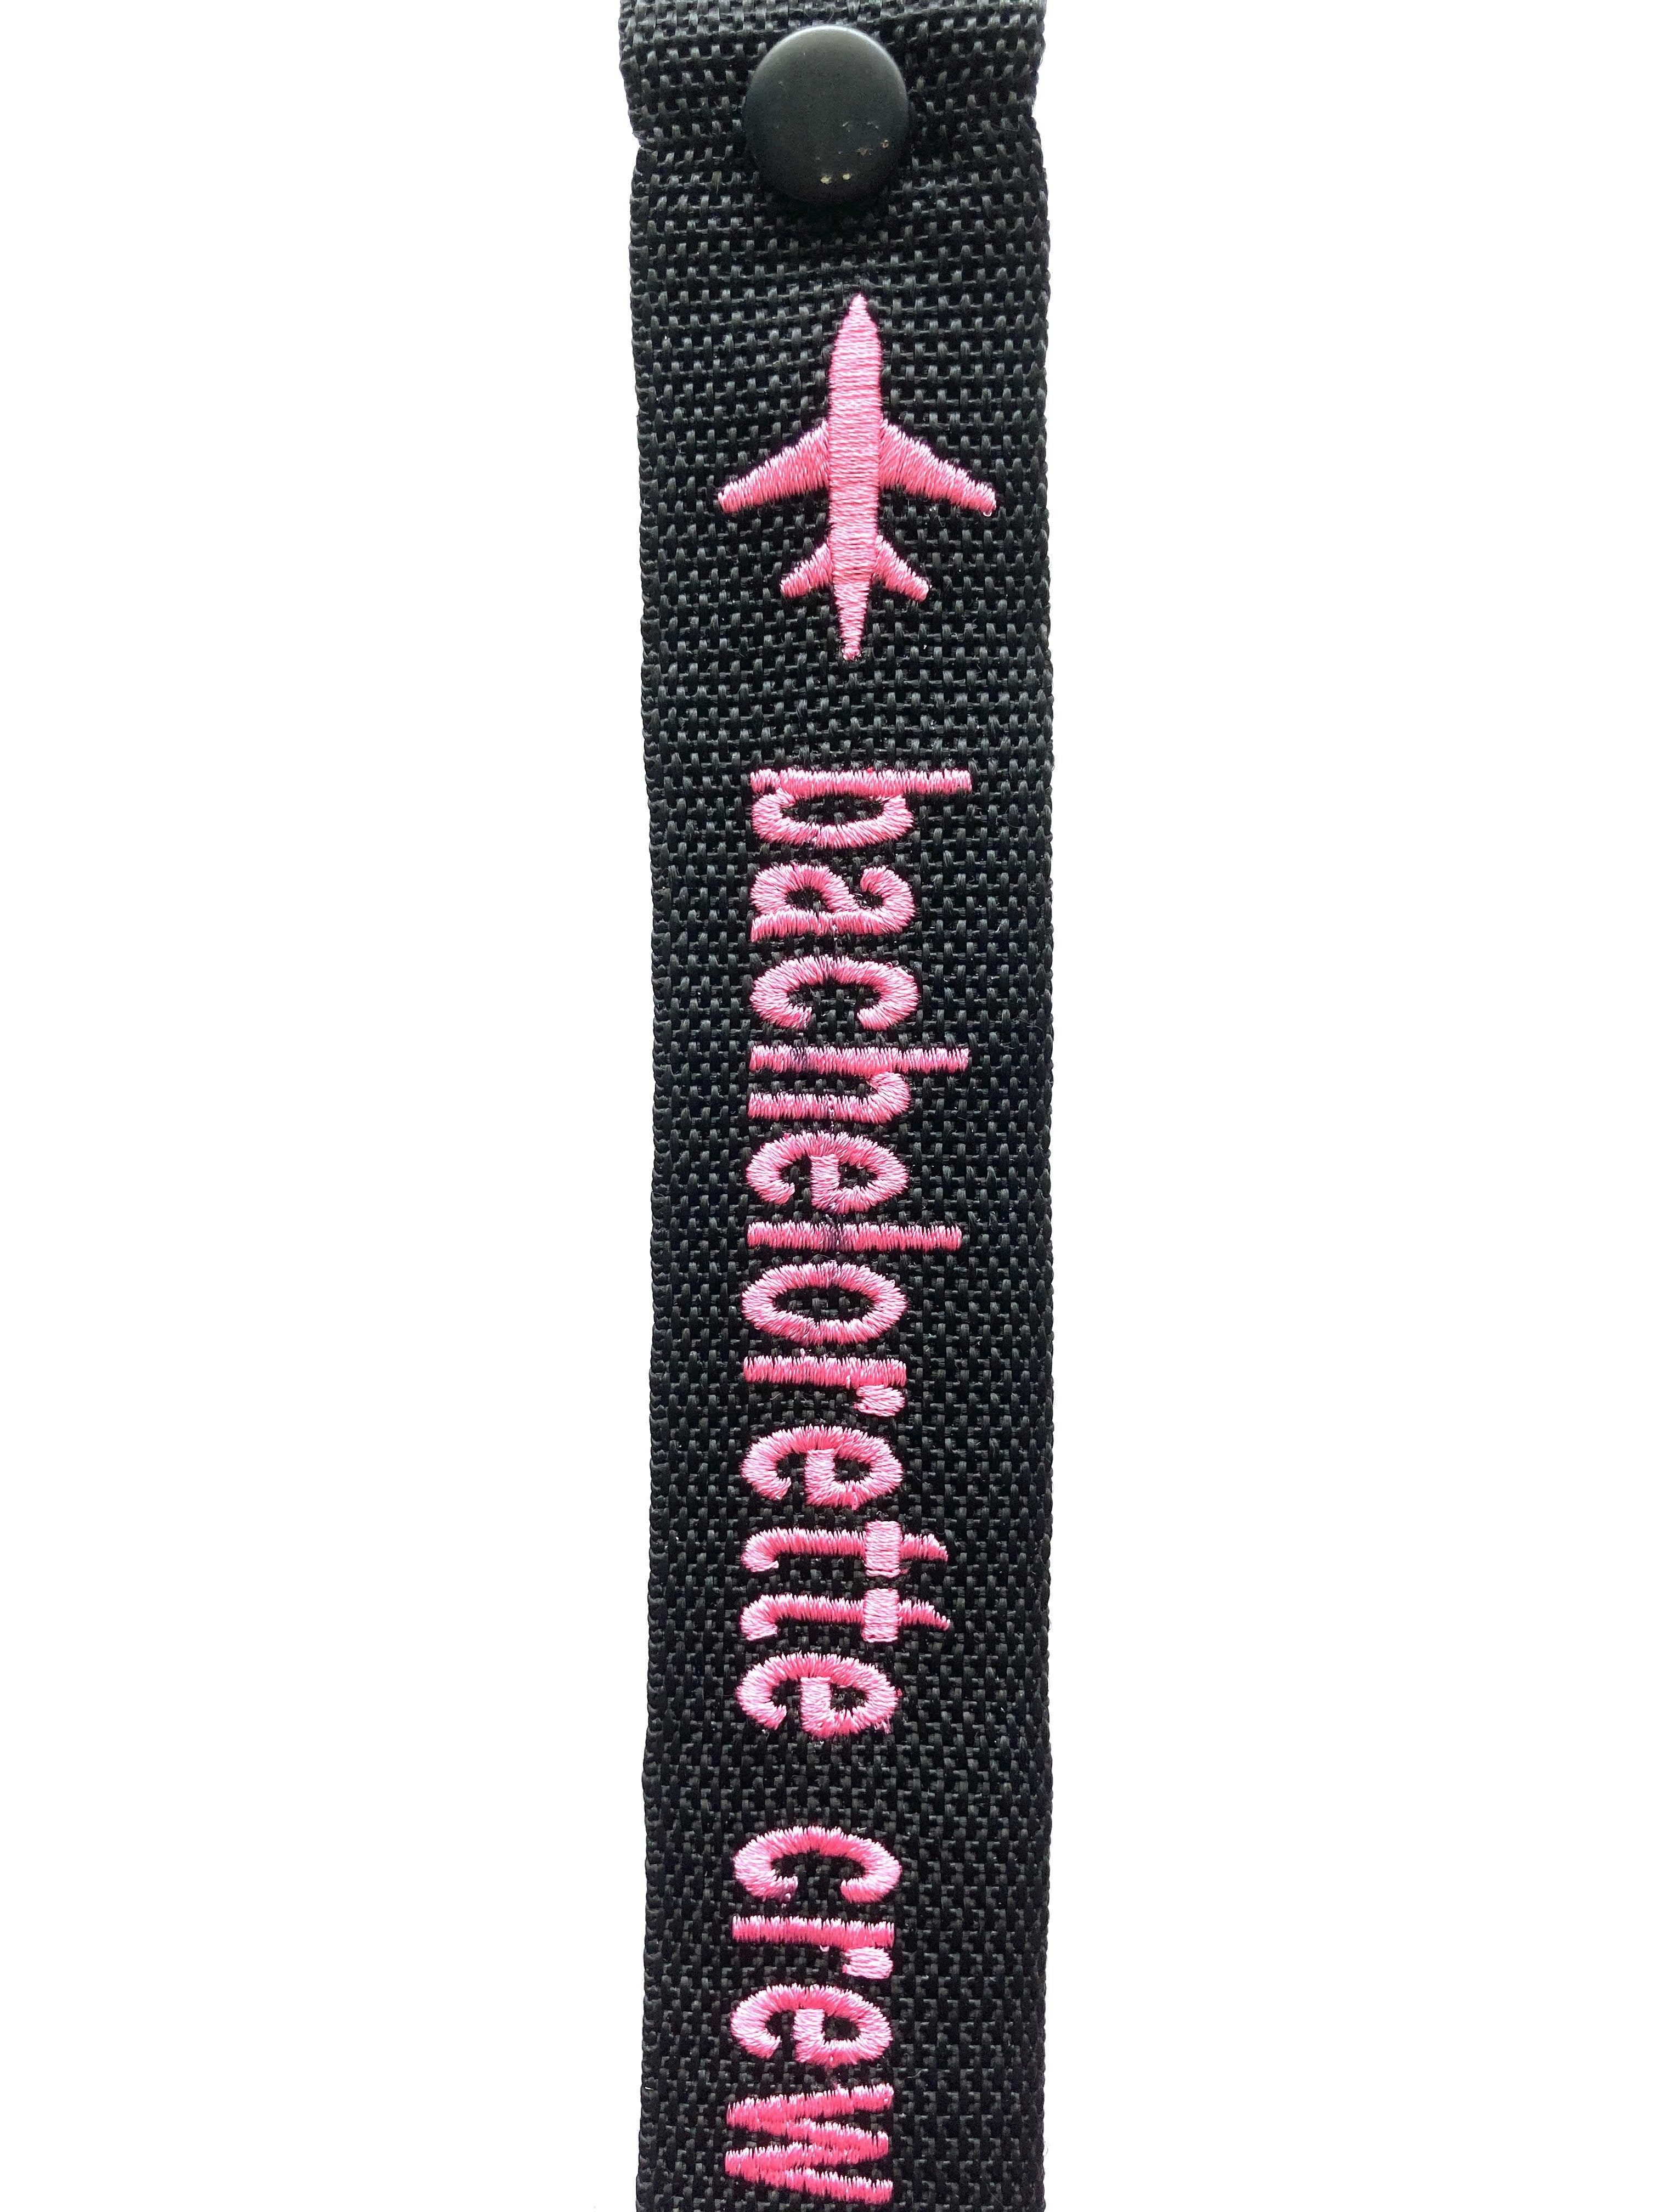 Crew Pink Luggage Tags - Bachelorette crew